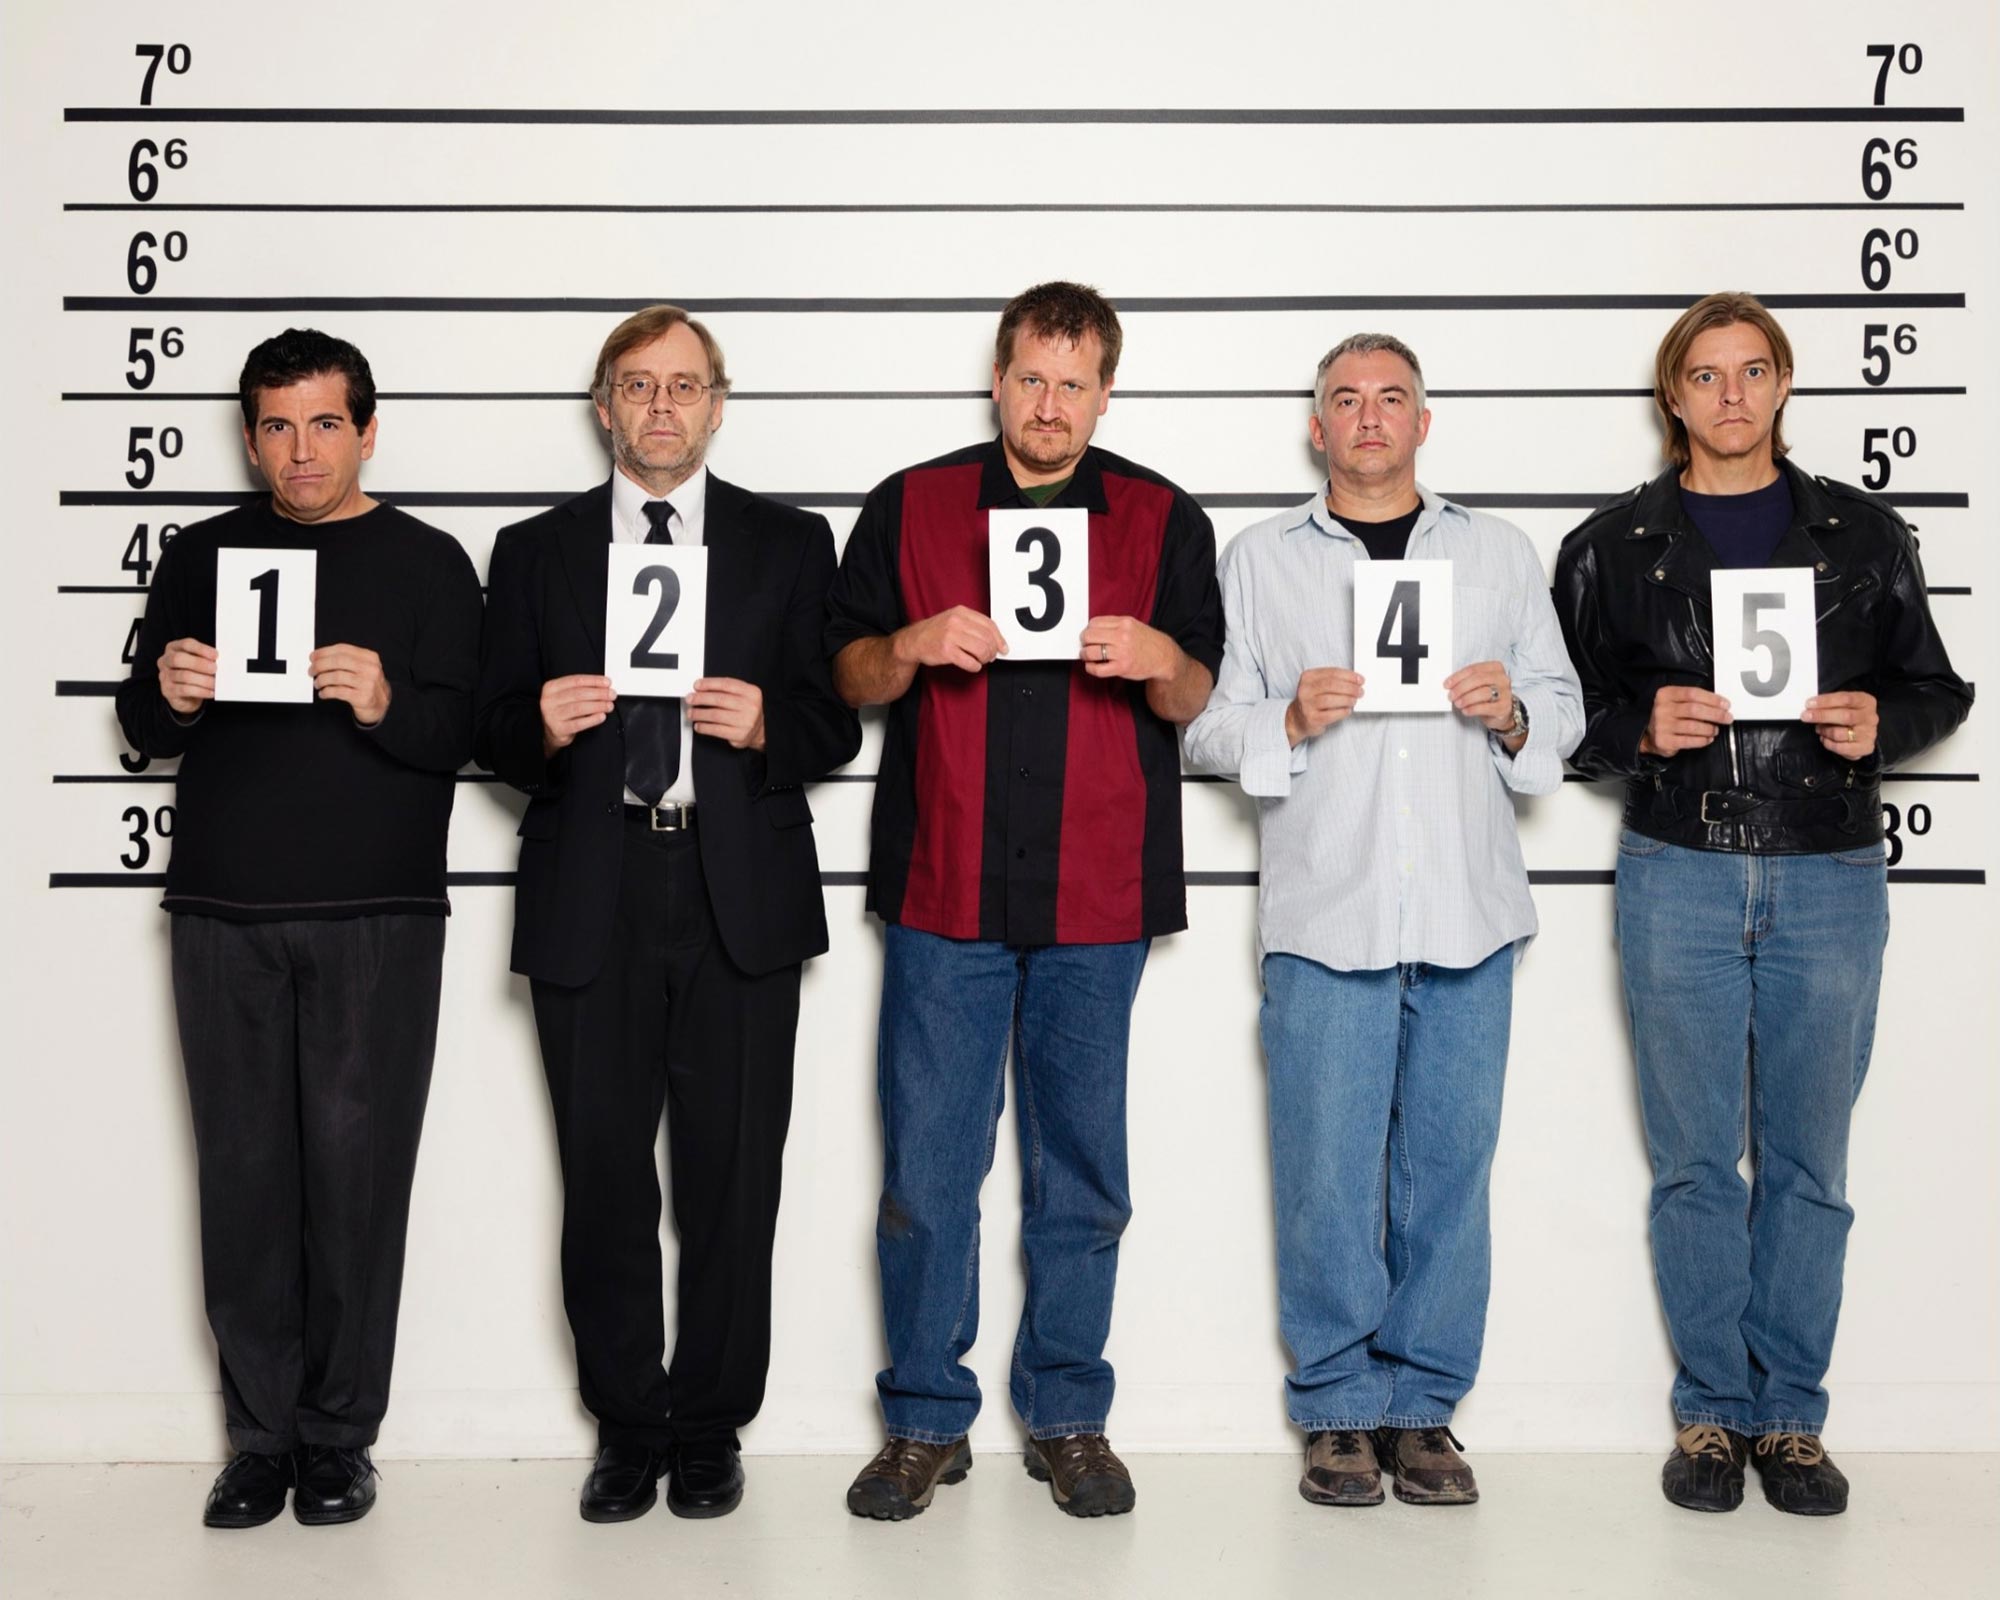 Not the Usual Suspects: New Interactive Lineup Boosts Eyewitness Accuracy